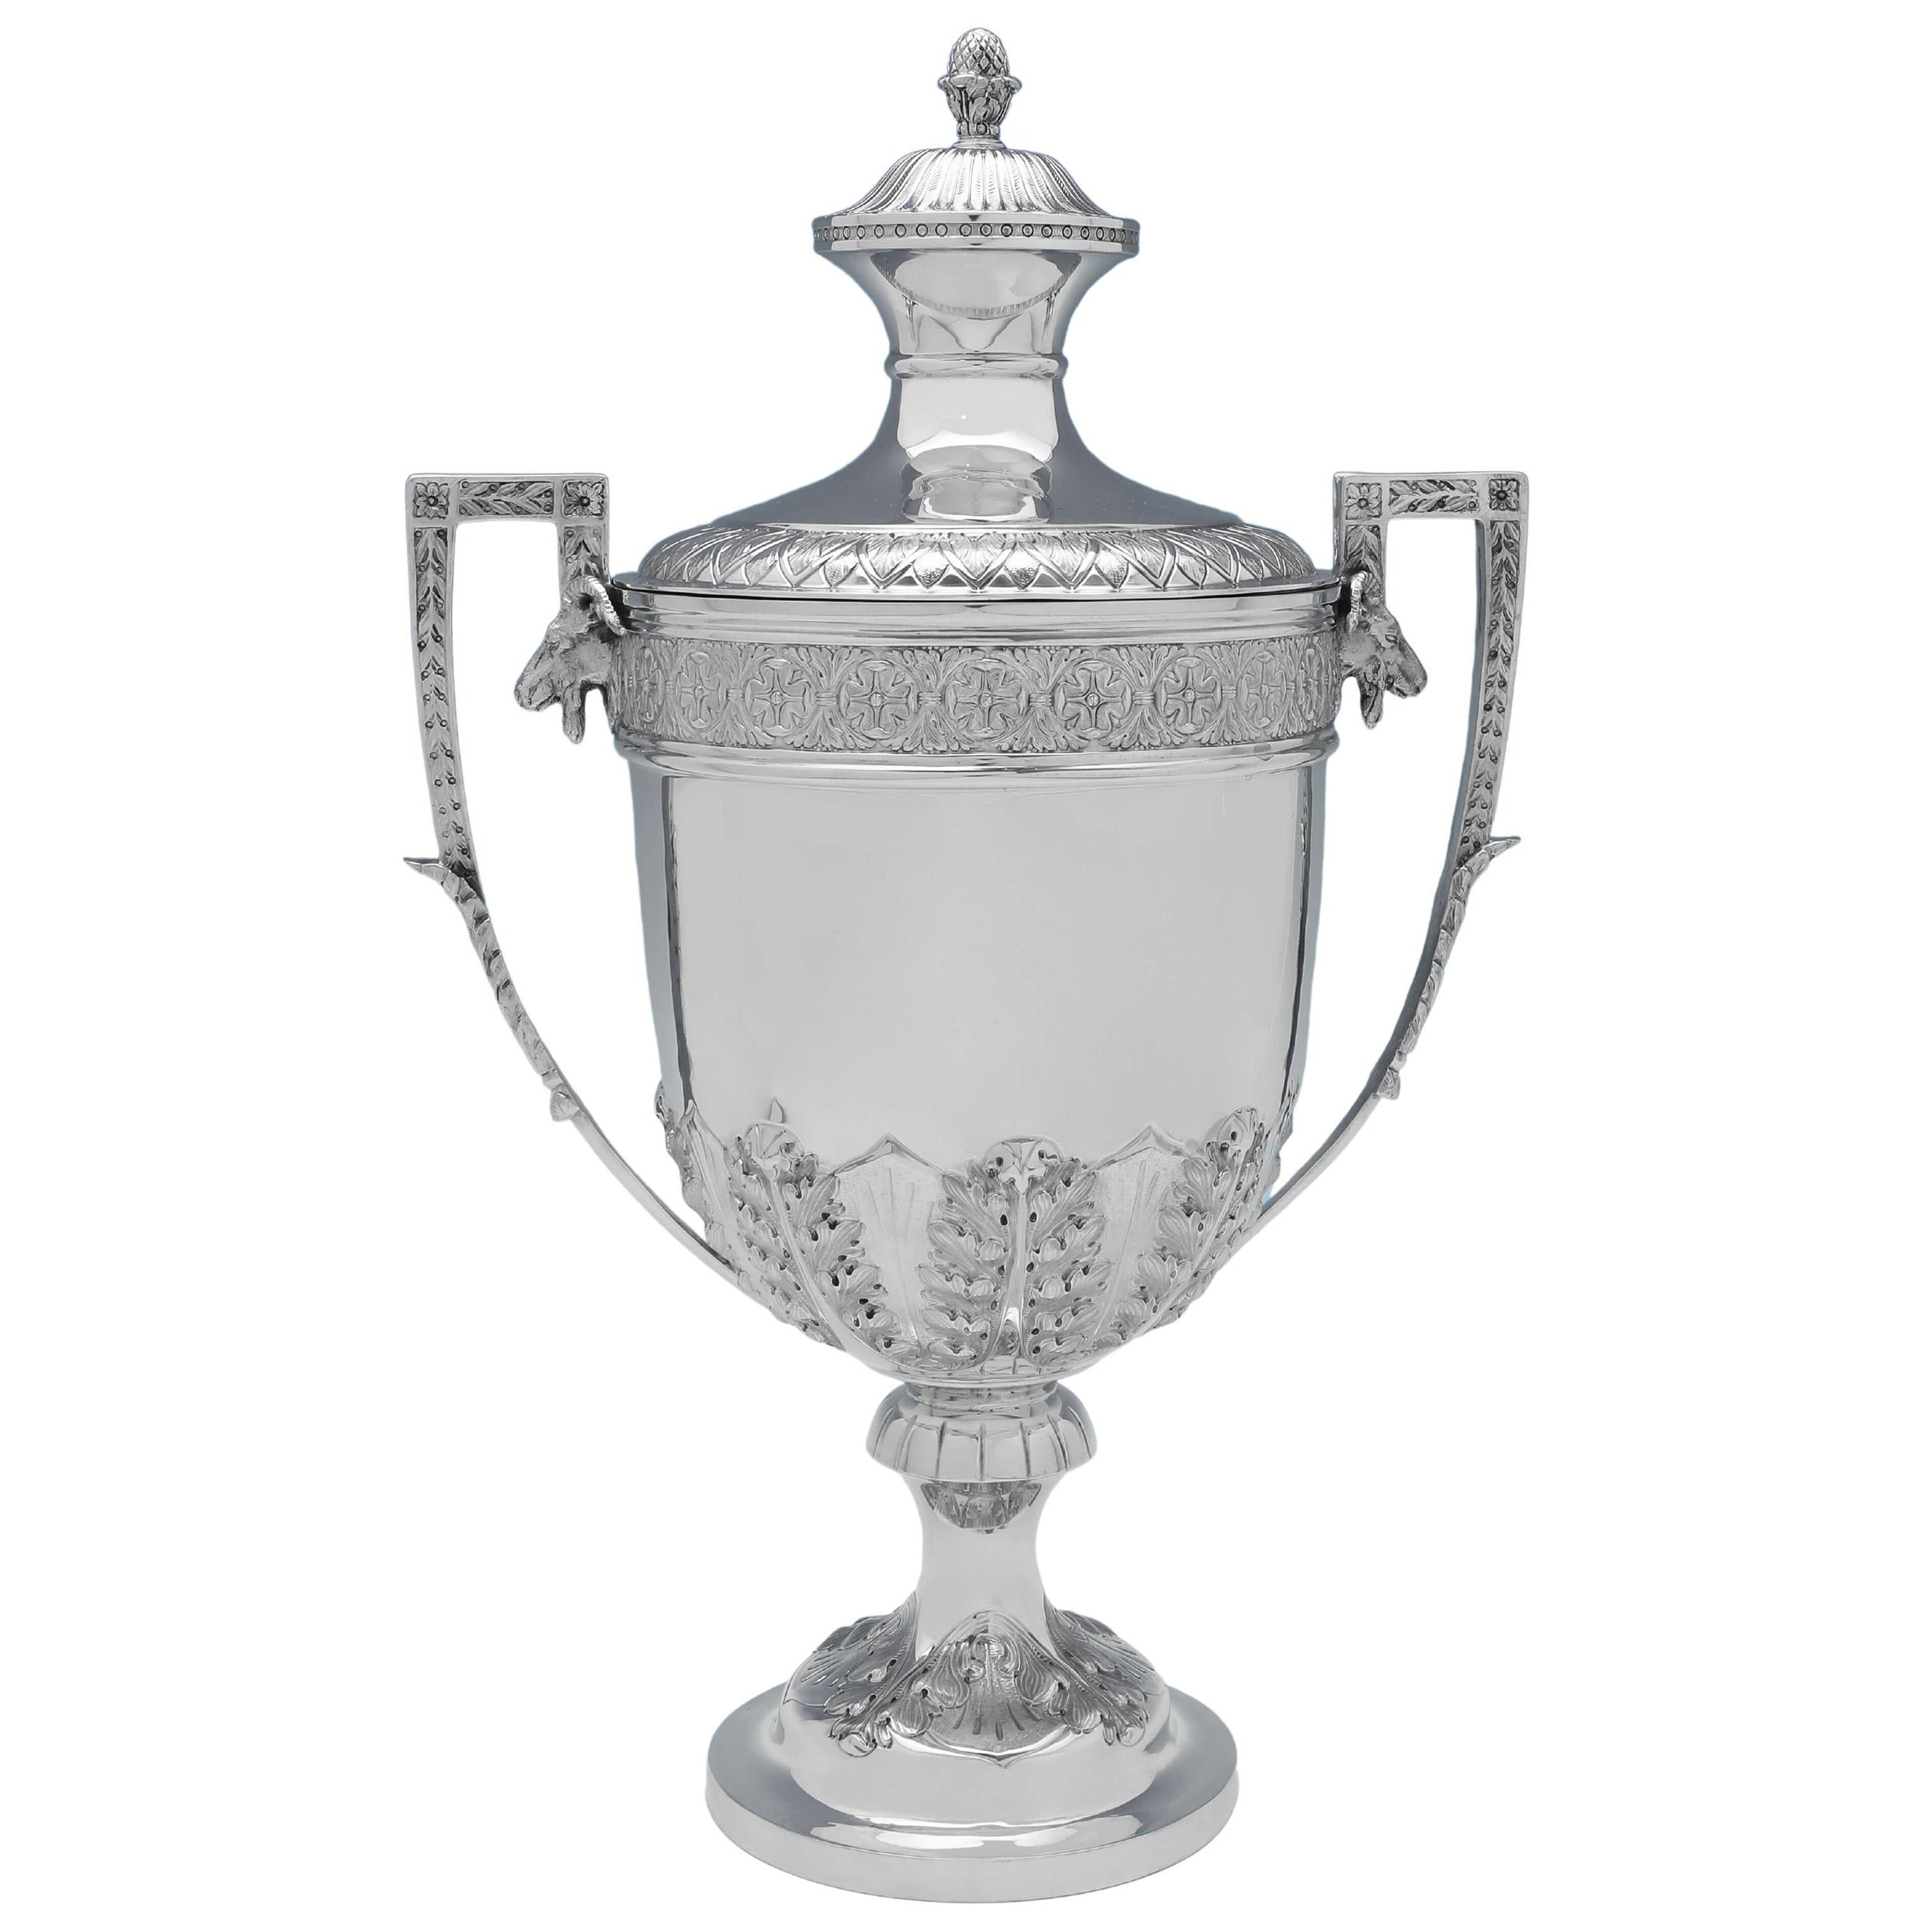 Adam Style Antique Sterling Silver Trophy or Cup & Cover, 1902 Mappin & Webb